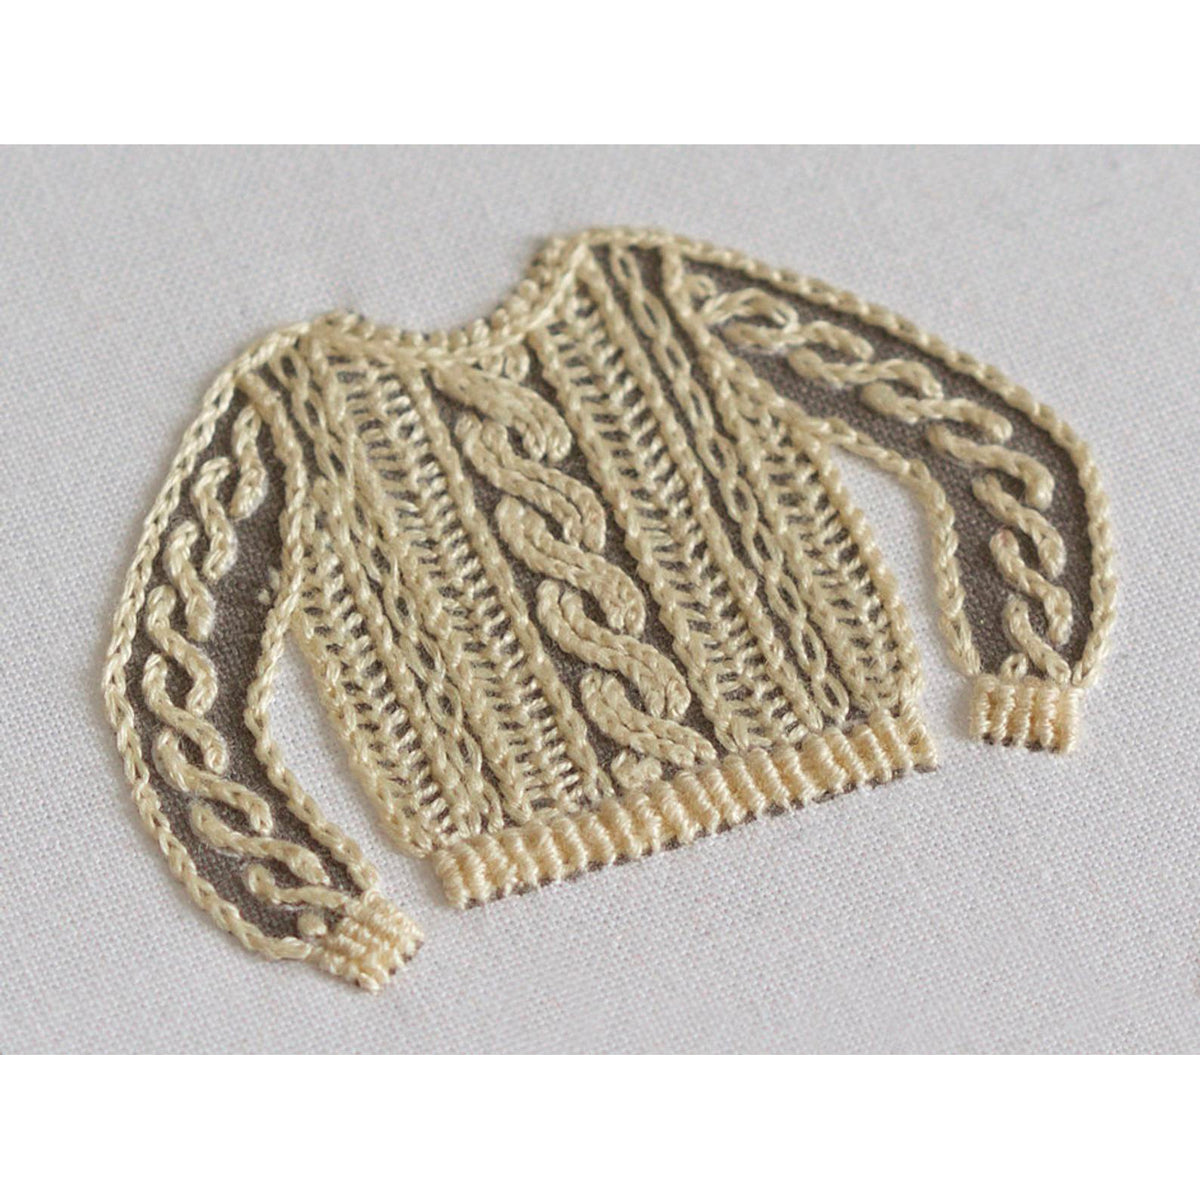 Hand Embroidery Stitch Sampler - Knit Sweater